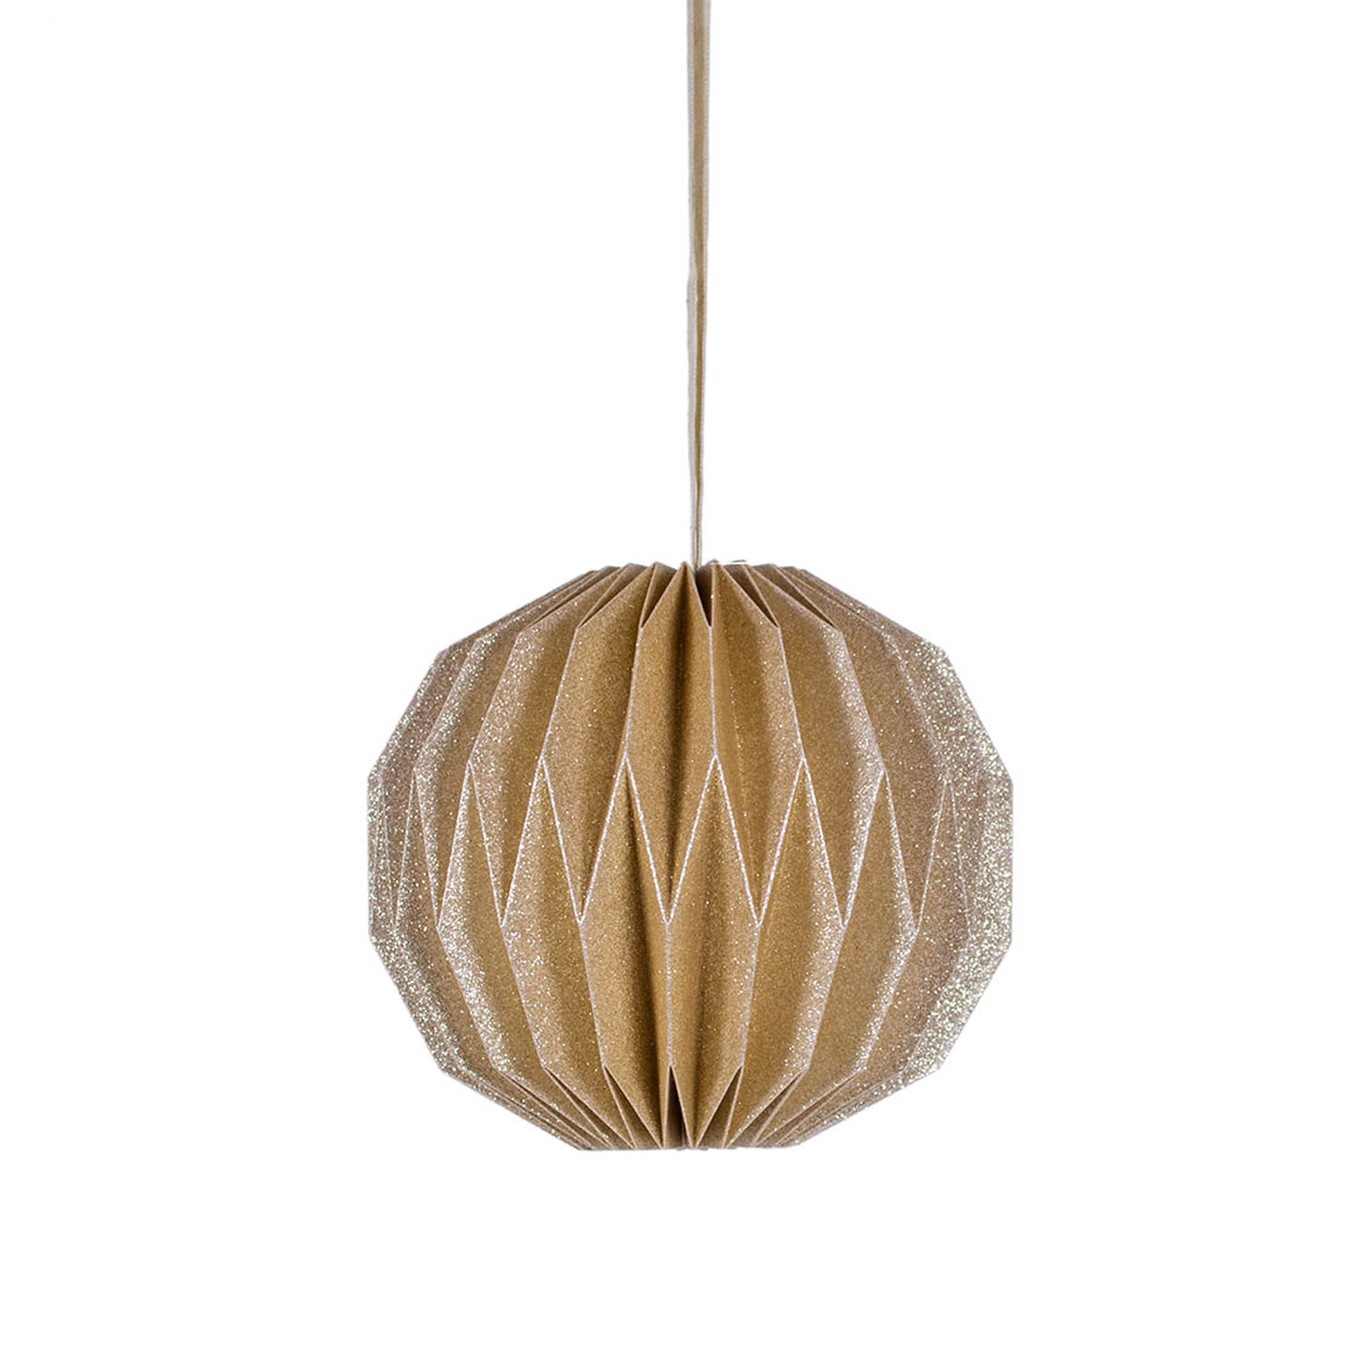 Tilly 30 Christmas Decoration Ball, Gold